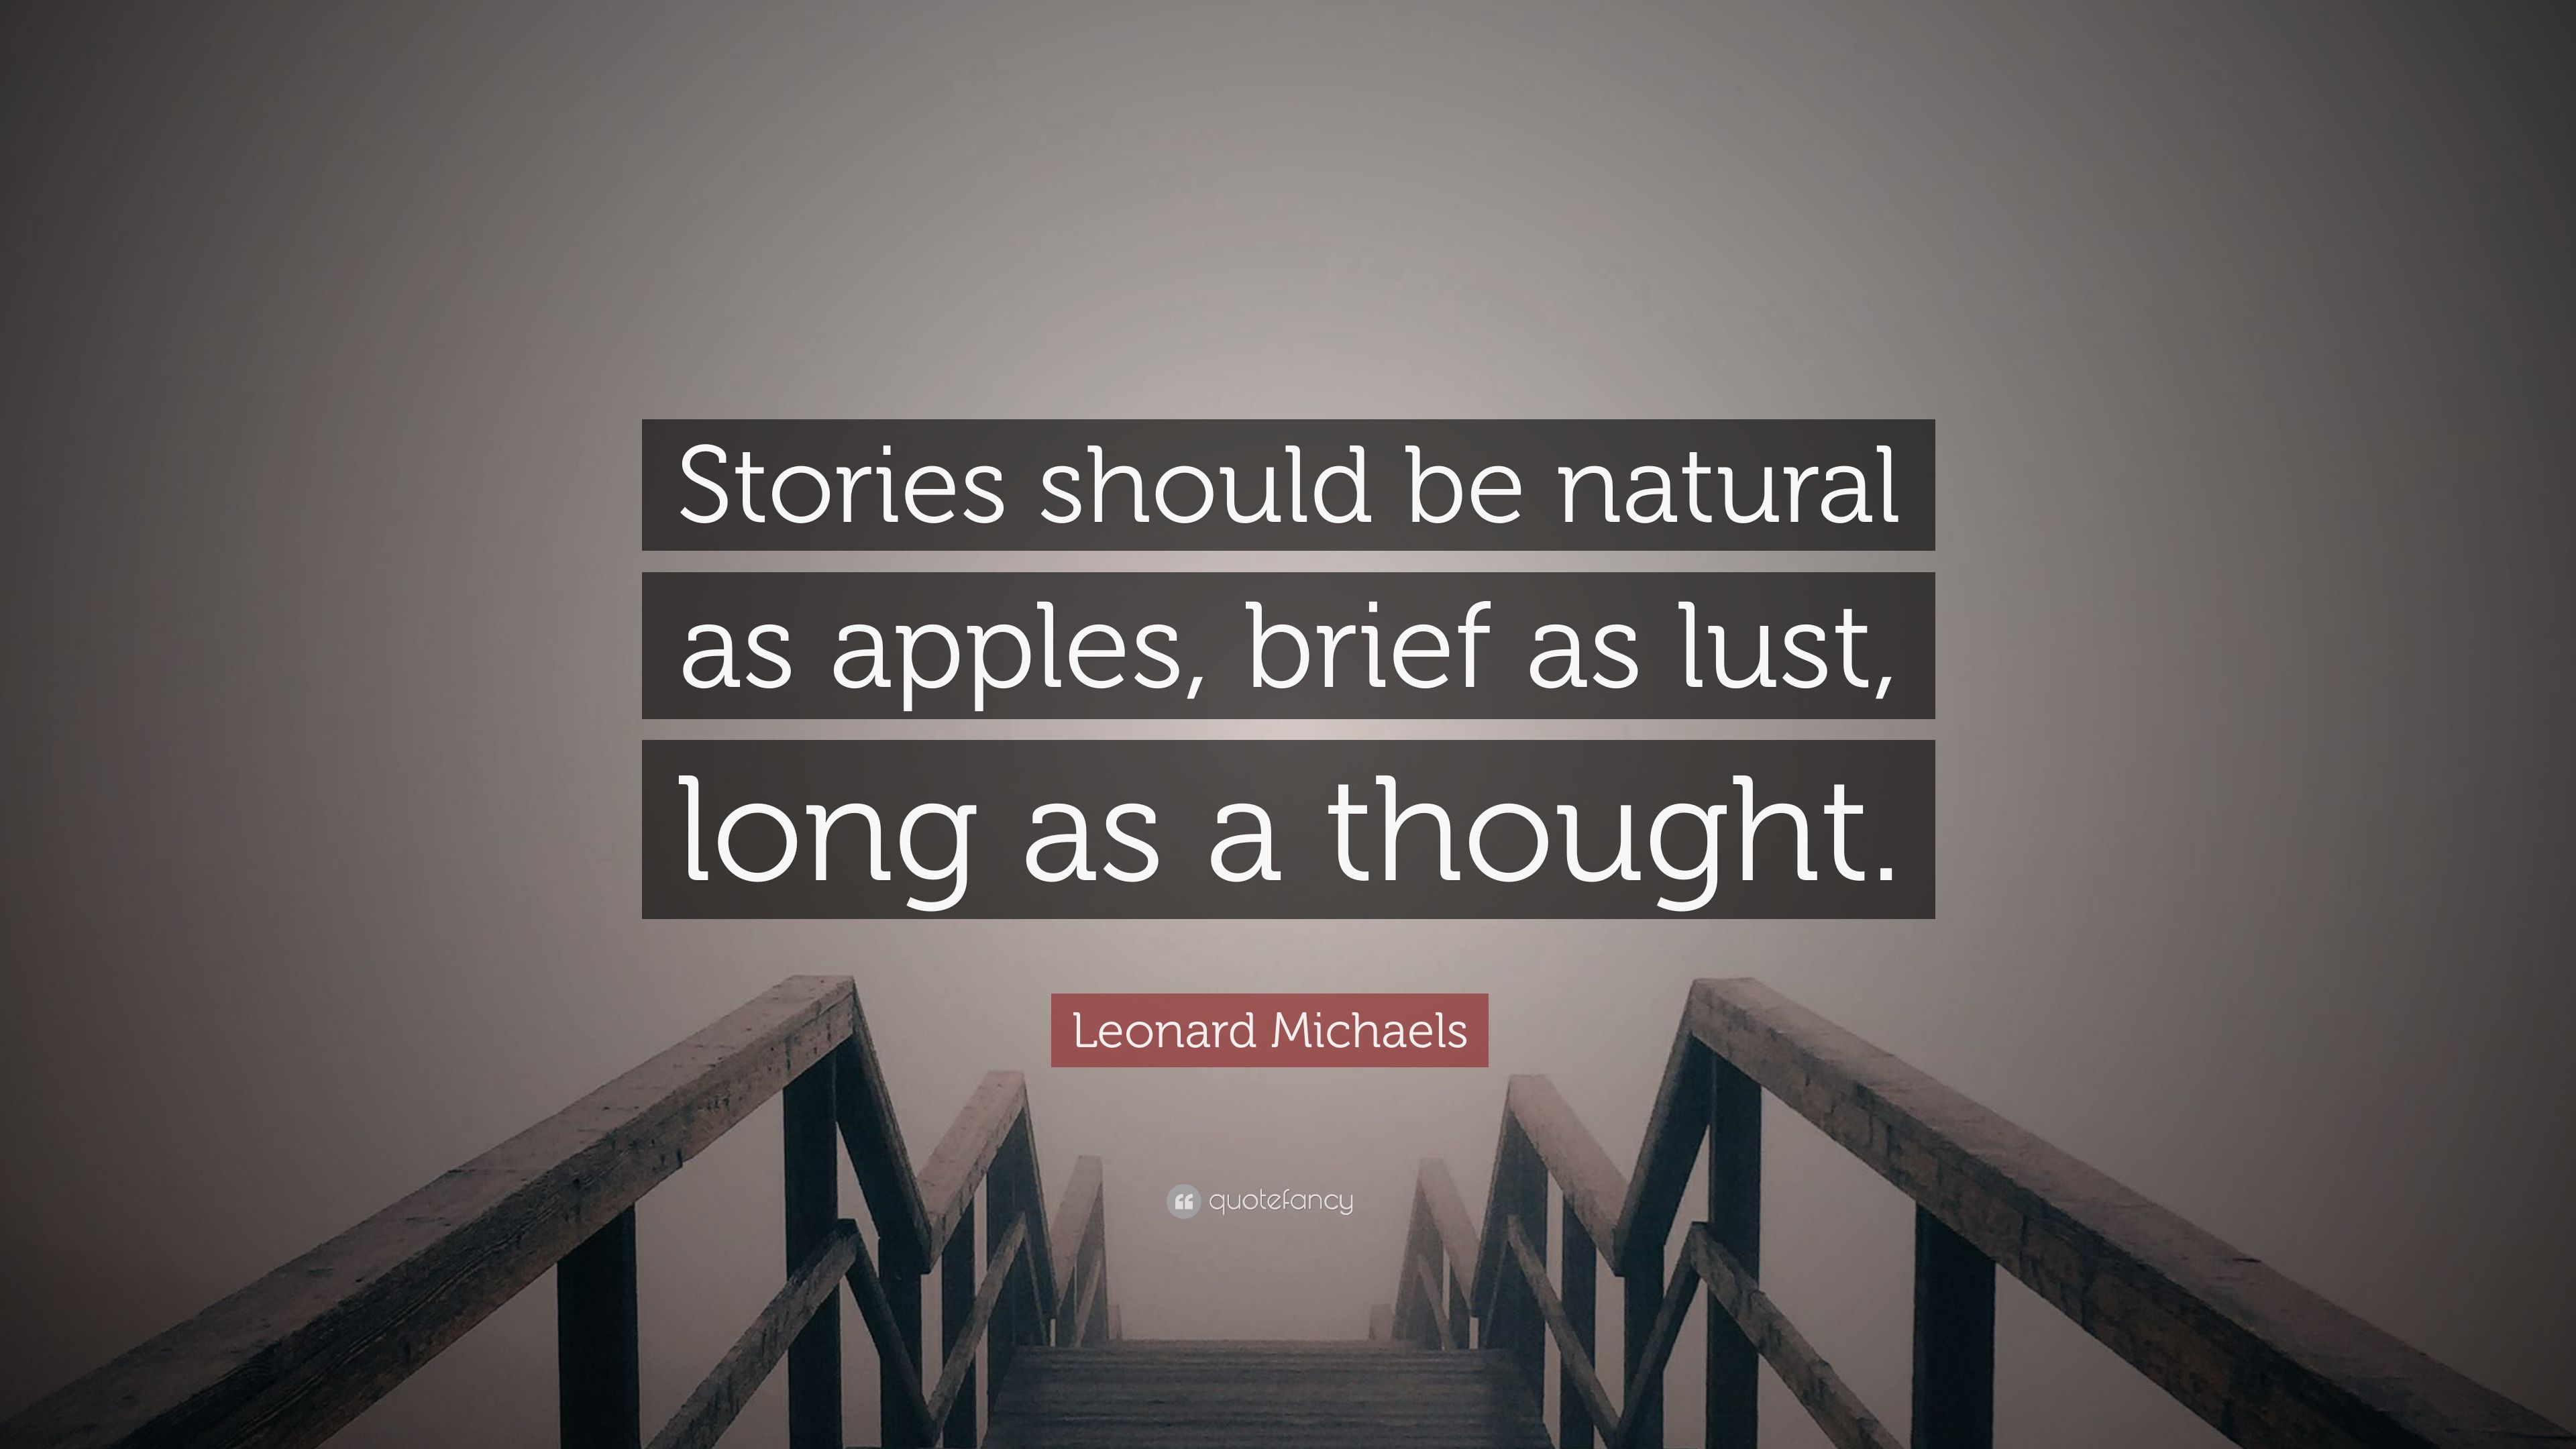 Leonard Michaels Quote: “Stories should be natural as apples